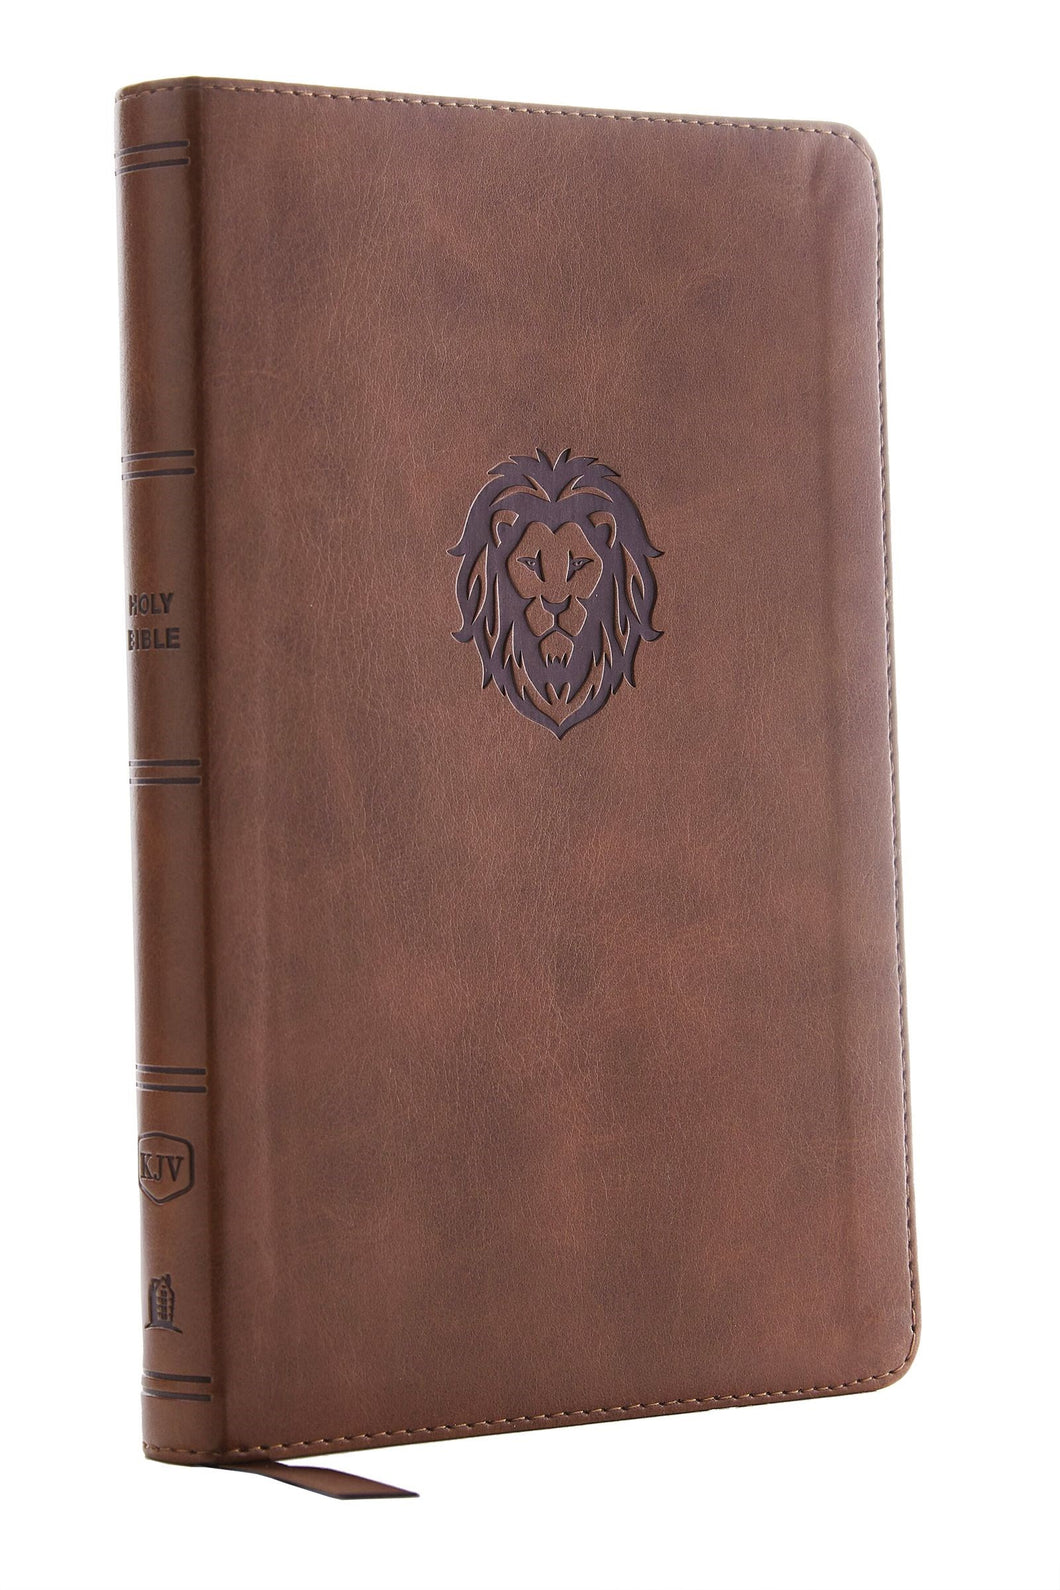 KJV Thinline Bible/Youth Edition (Comfort Print)-Brown Leathersoft